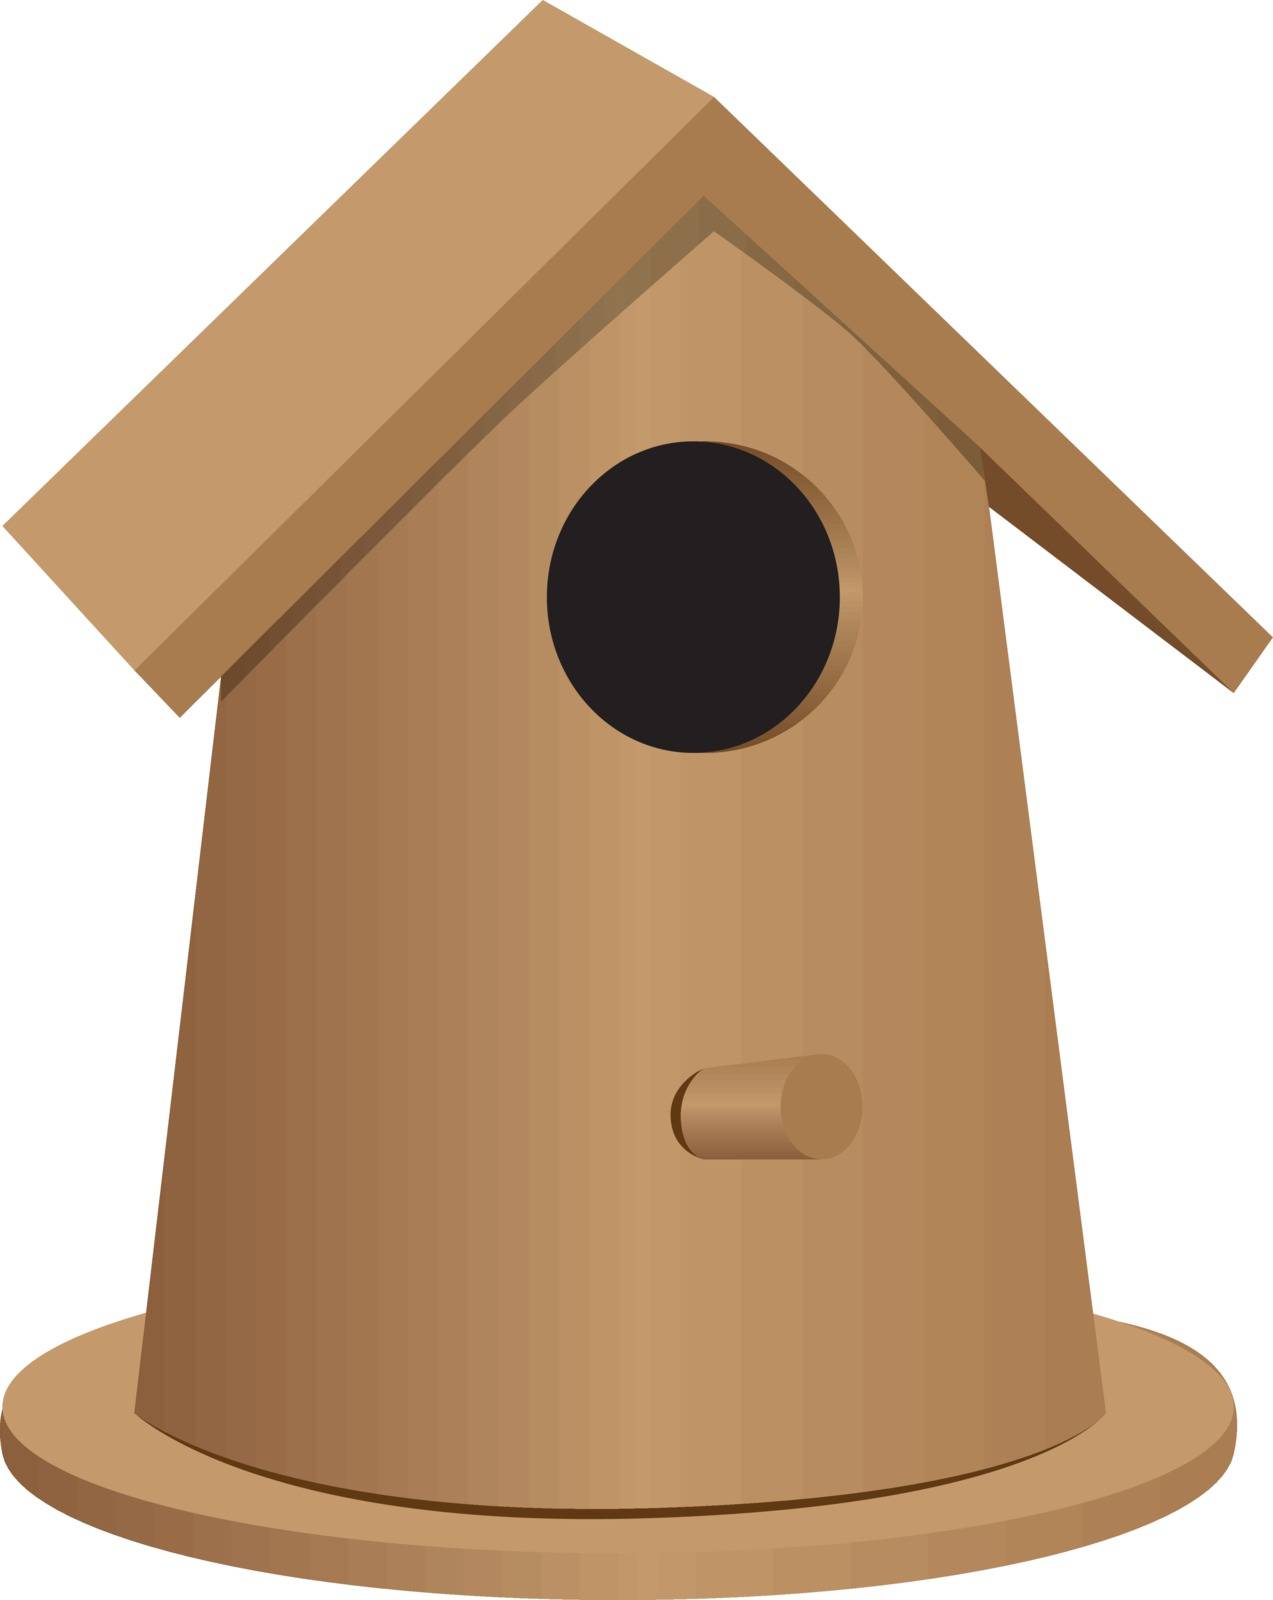 Wooden bird house oval shape by VIPDesignUSA